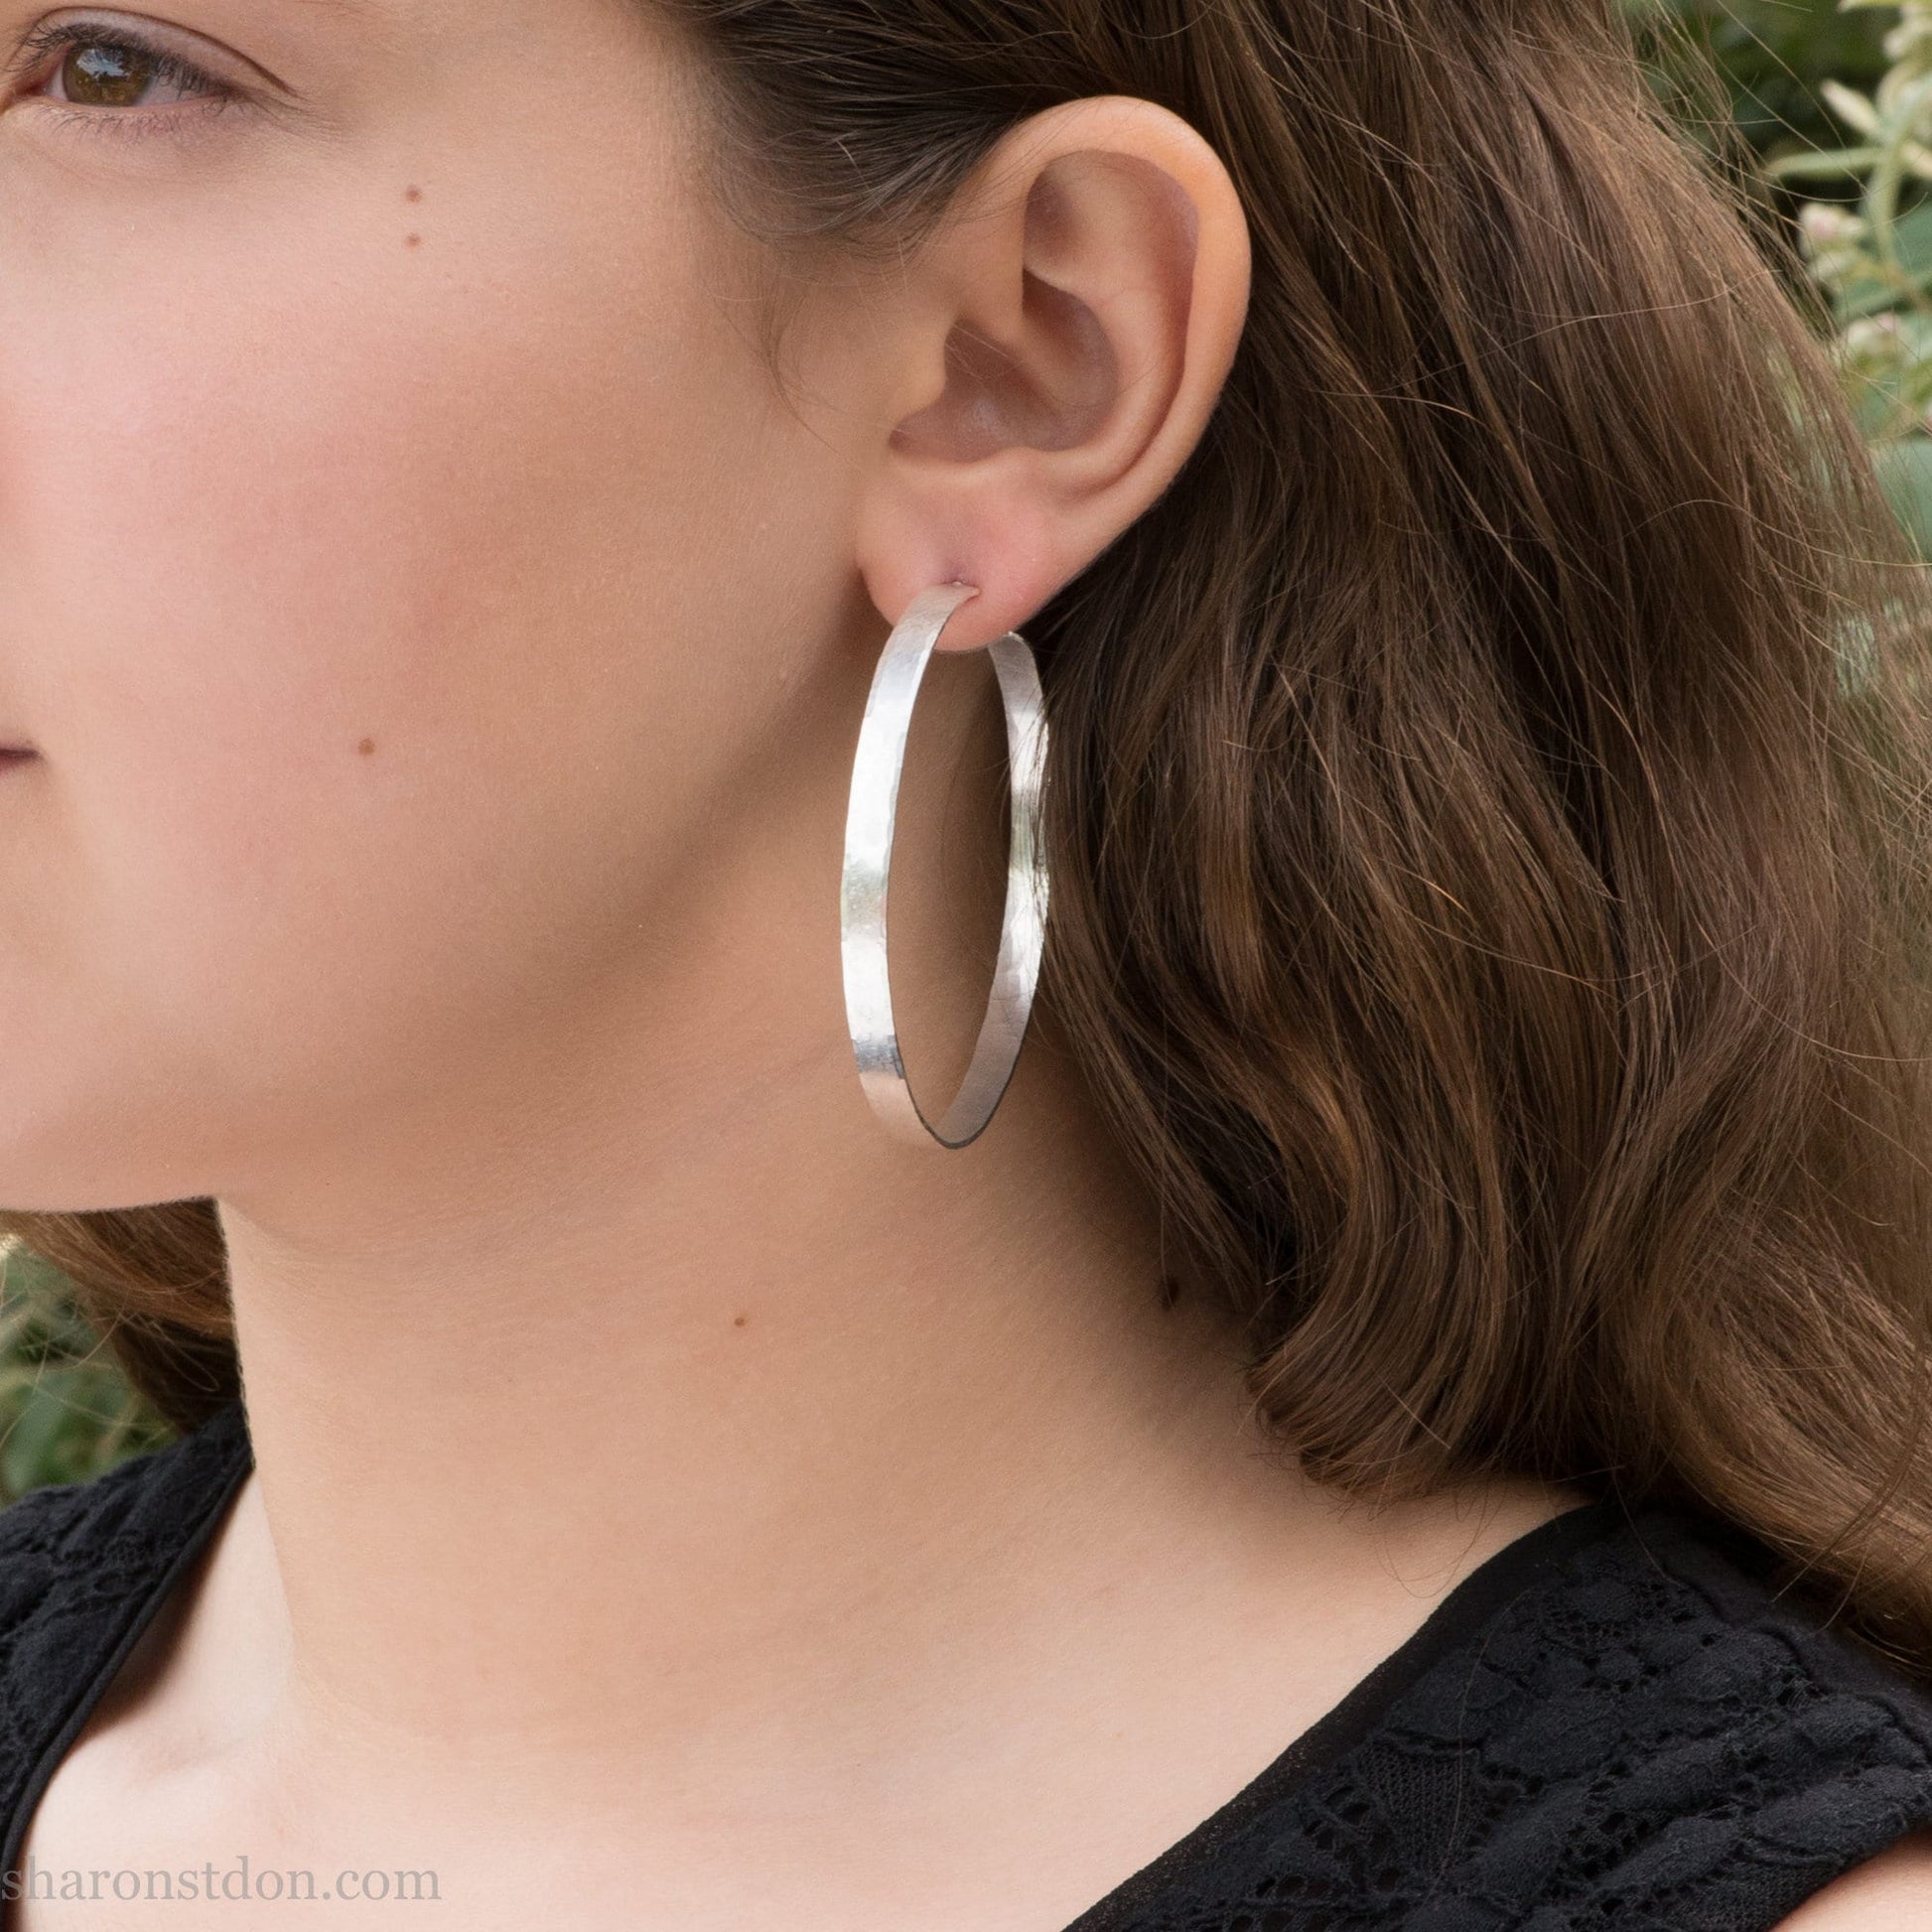 Handmade 925 sterling silver hoop earrings for women. 55mm diameter, 5mm wide, hammered texture with brushed, matte silver finish. Comfortable and lightweight for daily wear.